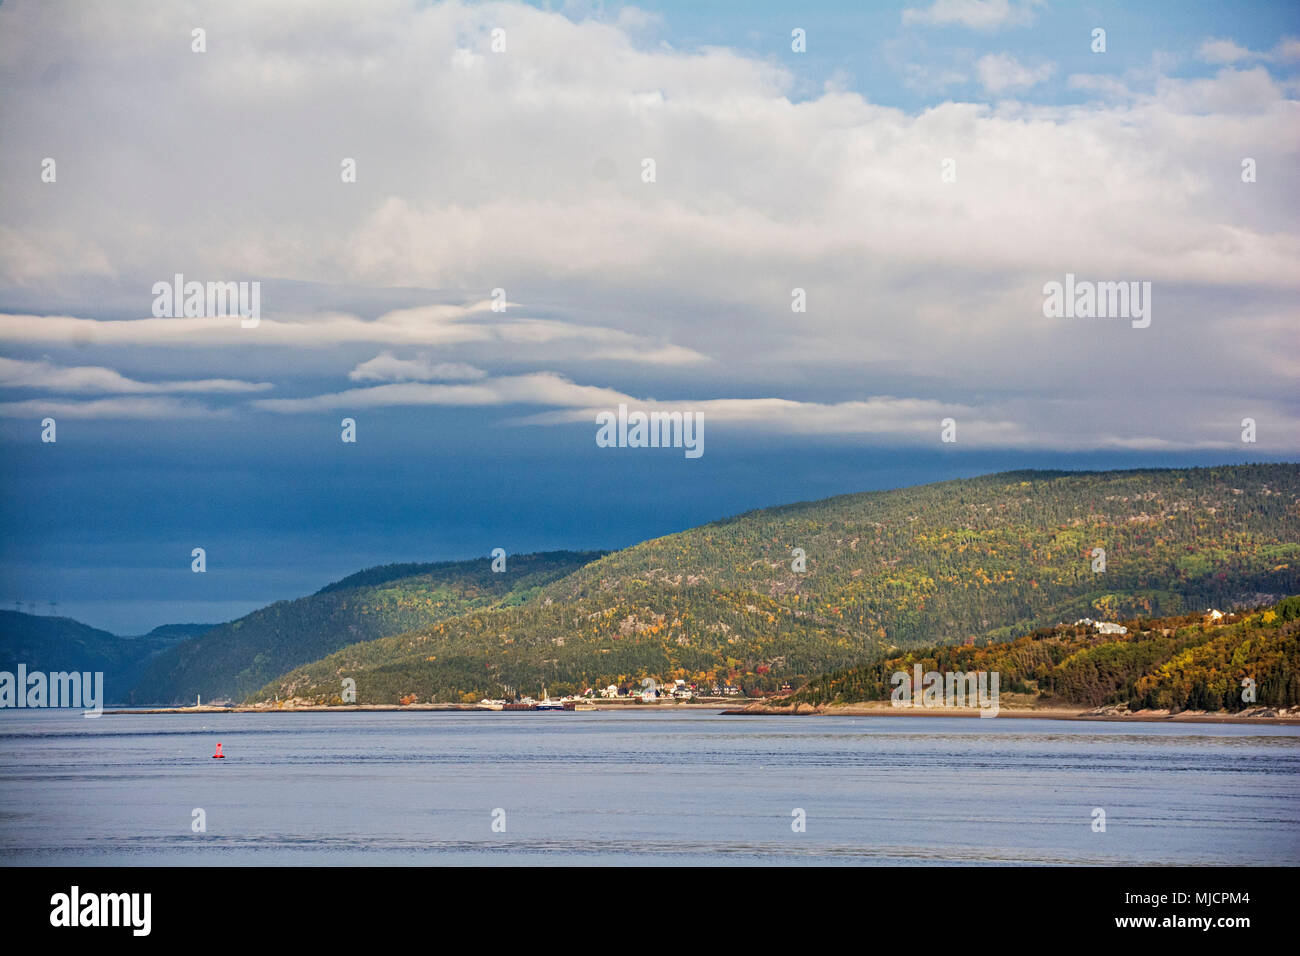 Gateway to Saguenay Fjord from Saint Lawrence River, Canada Stock Photo